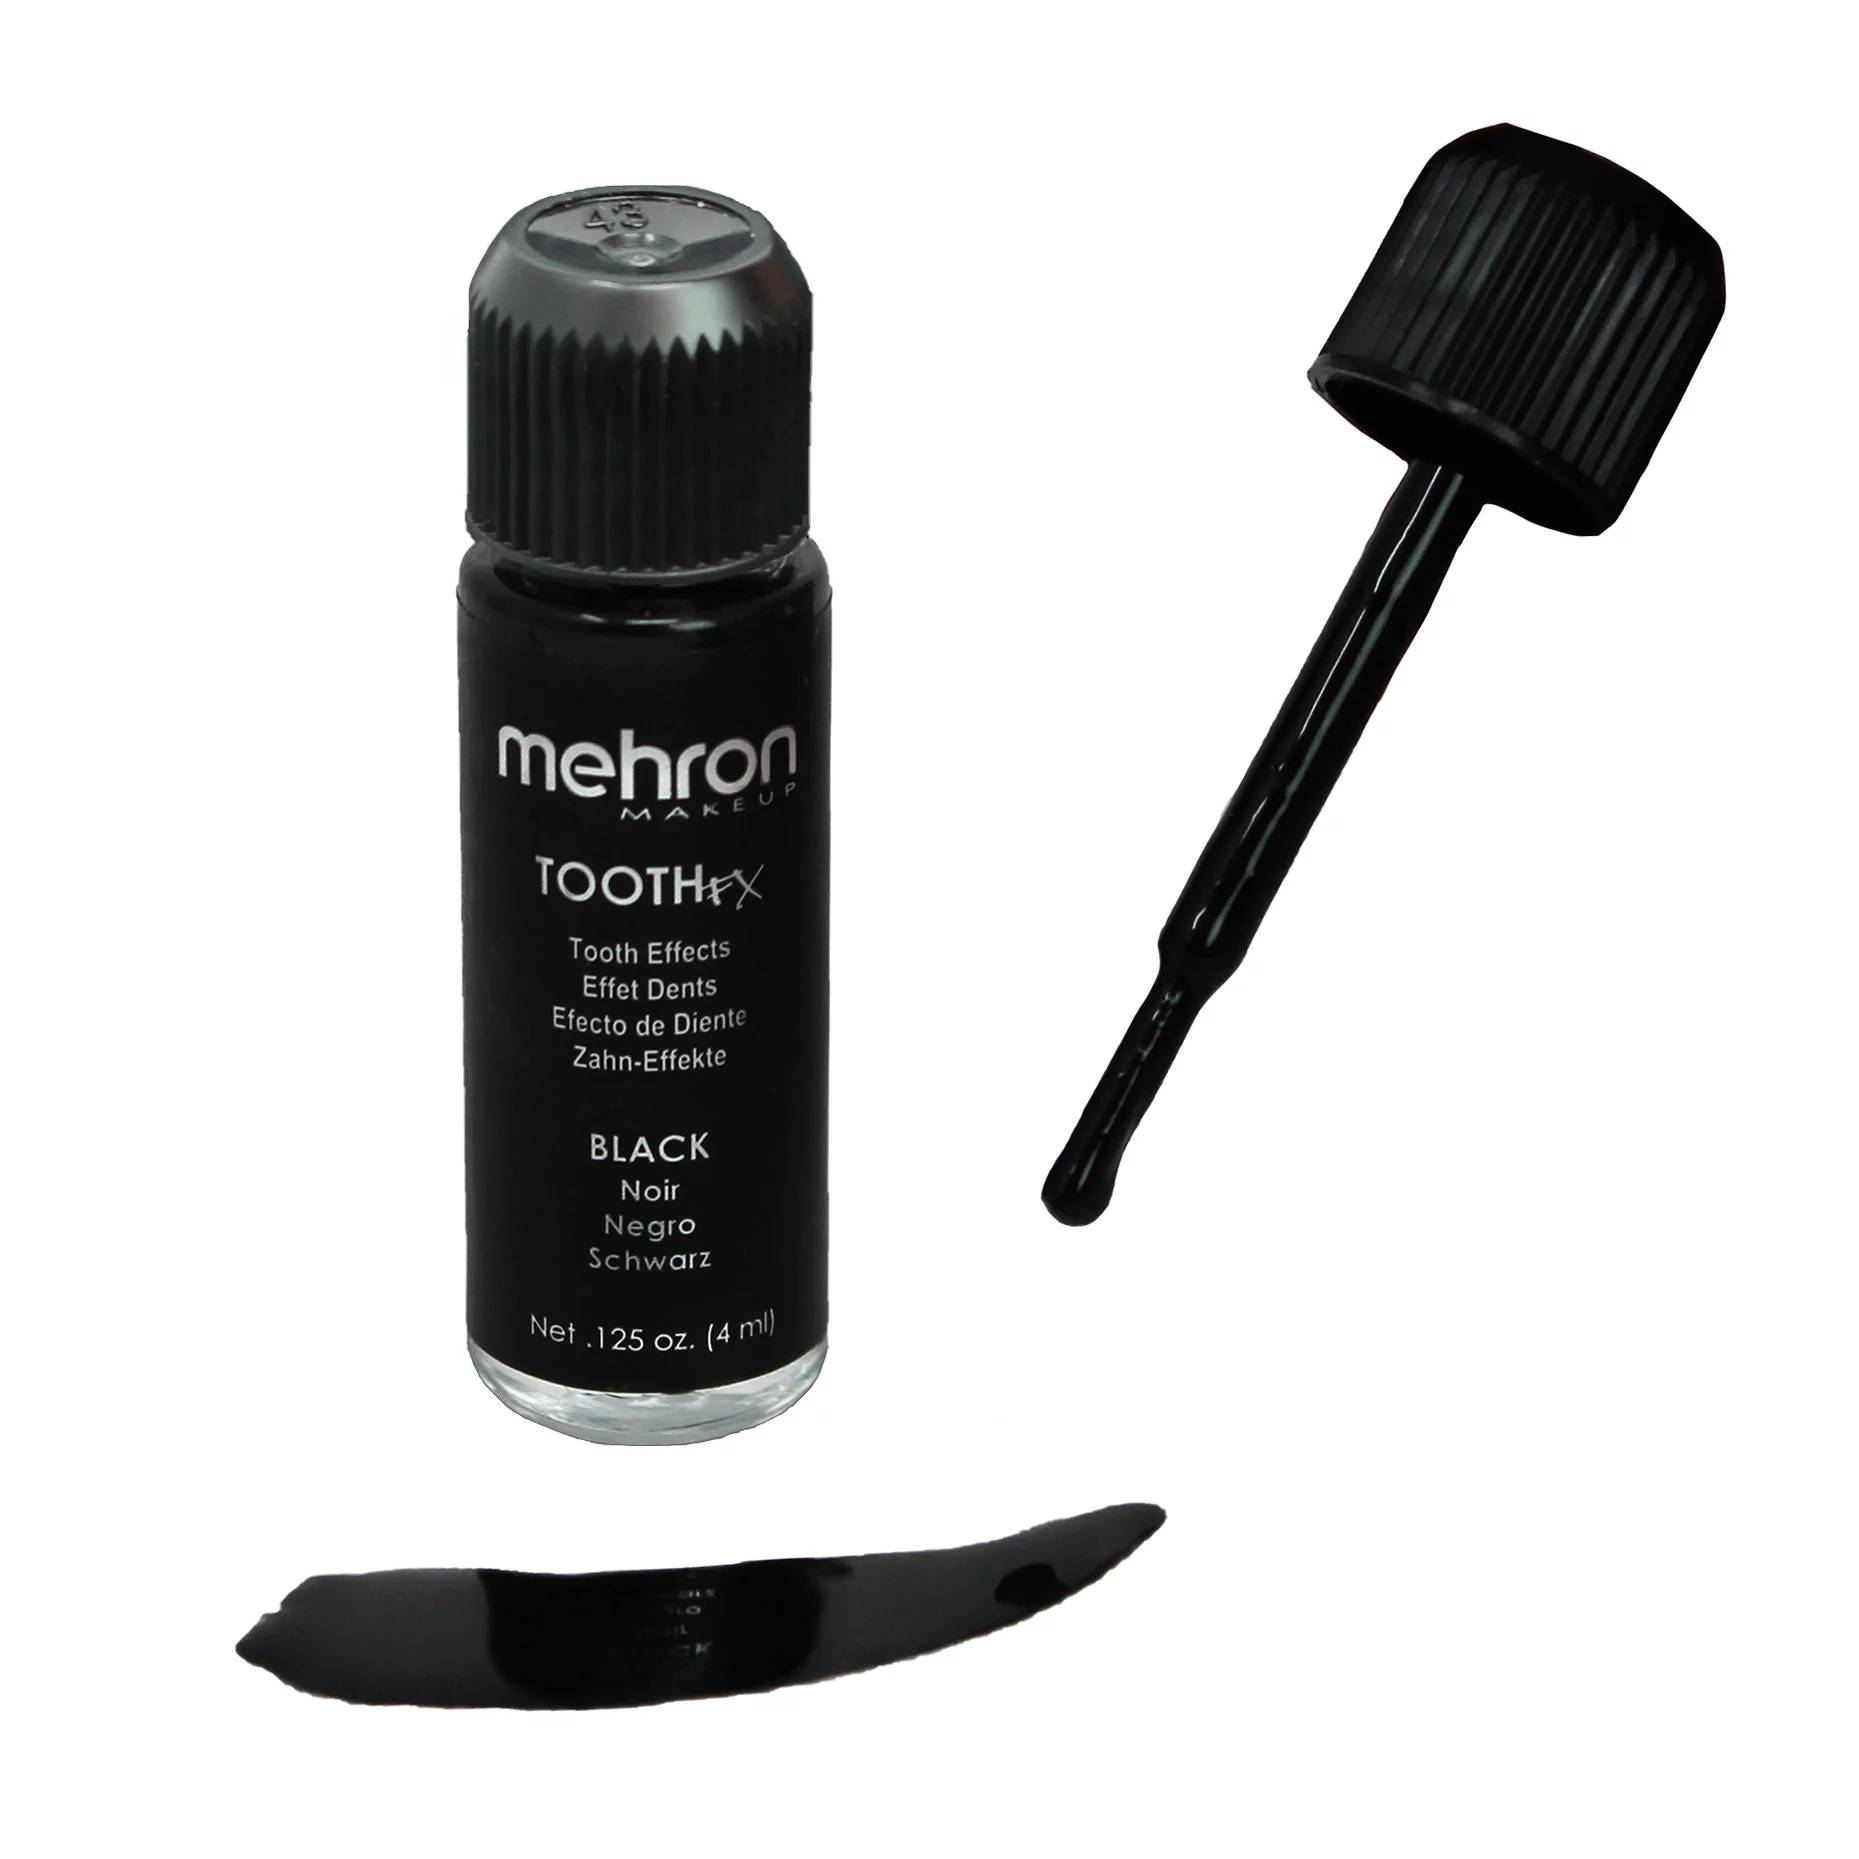 Mehron - Tooth FX - Black (4 ml) Tooth Paint